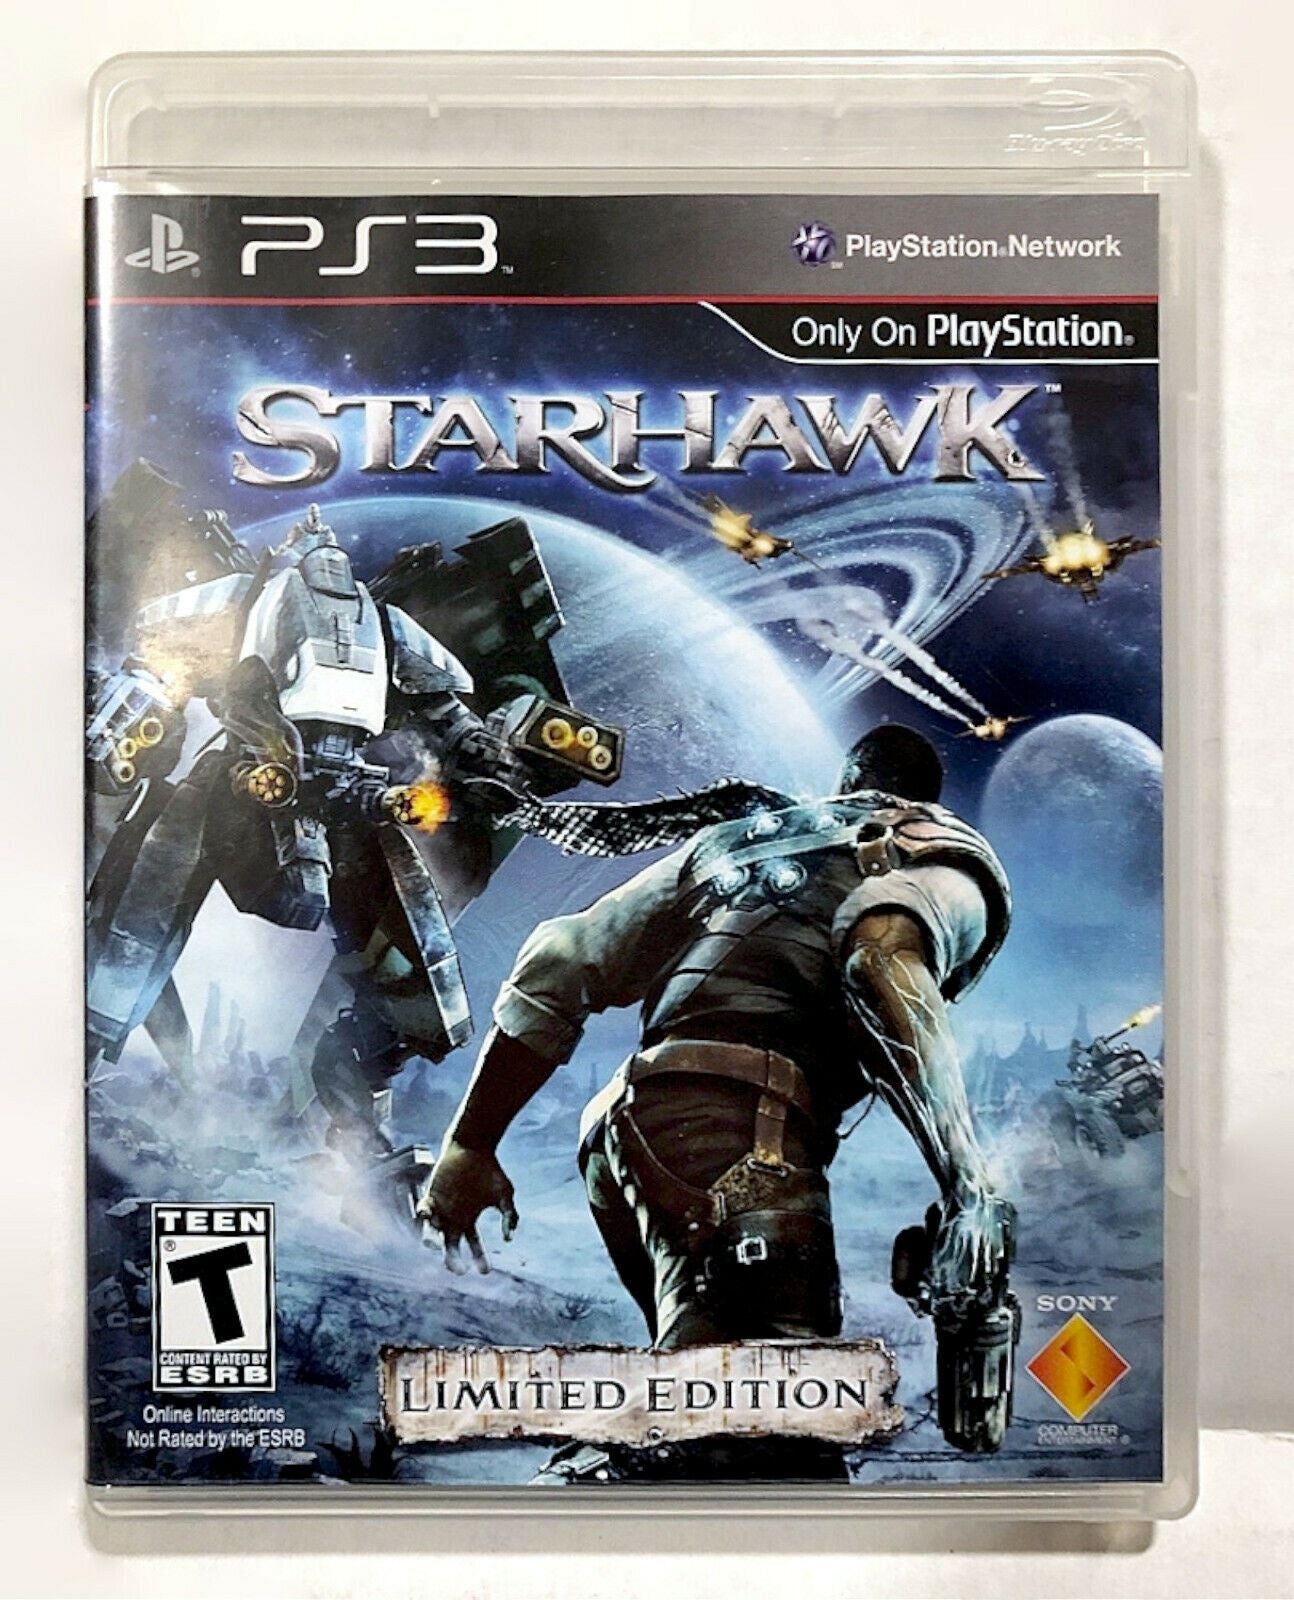 Starhawk Limited Edition PlayStation 3 Video Game Campaign Space Drama Adventure [Used/Refurbished]